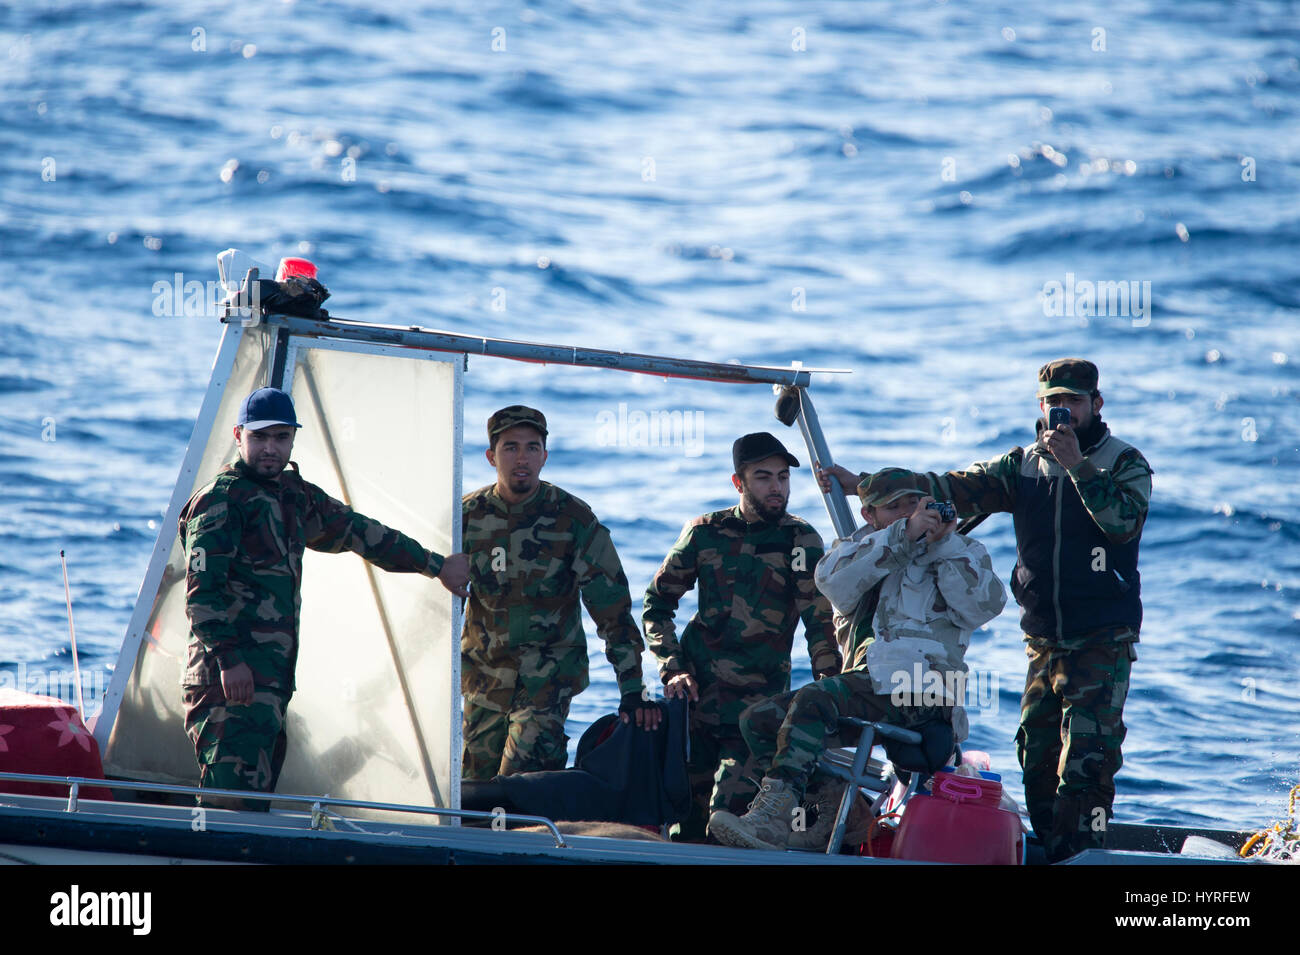 A small boat with 4 people, calling themself Libyan Coastguard was following a rubberboat with migrants and watching and documenting the SAR operation Stock Photo